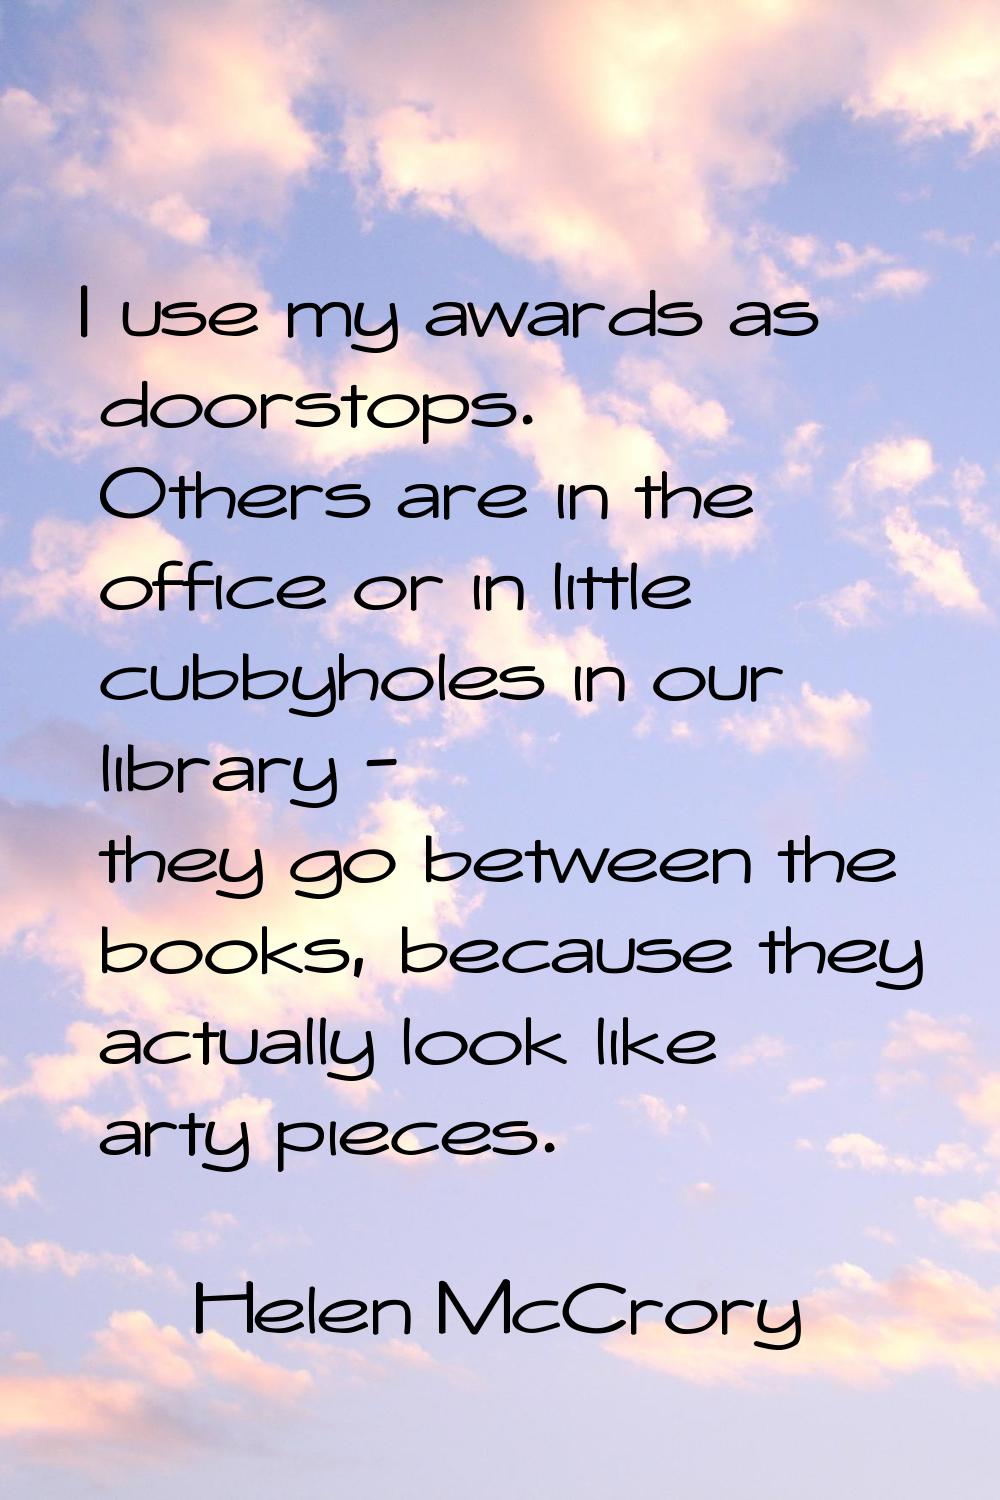 I use my awards as doorstops. Others are in the office or in little cubbyholes in our library - the